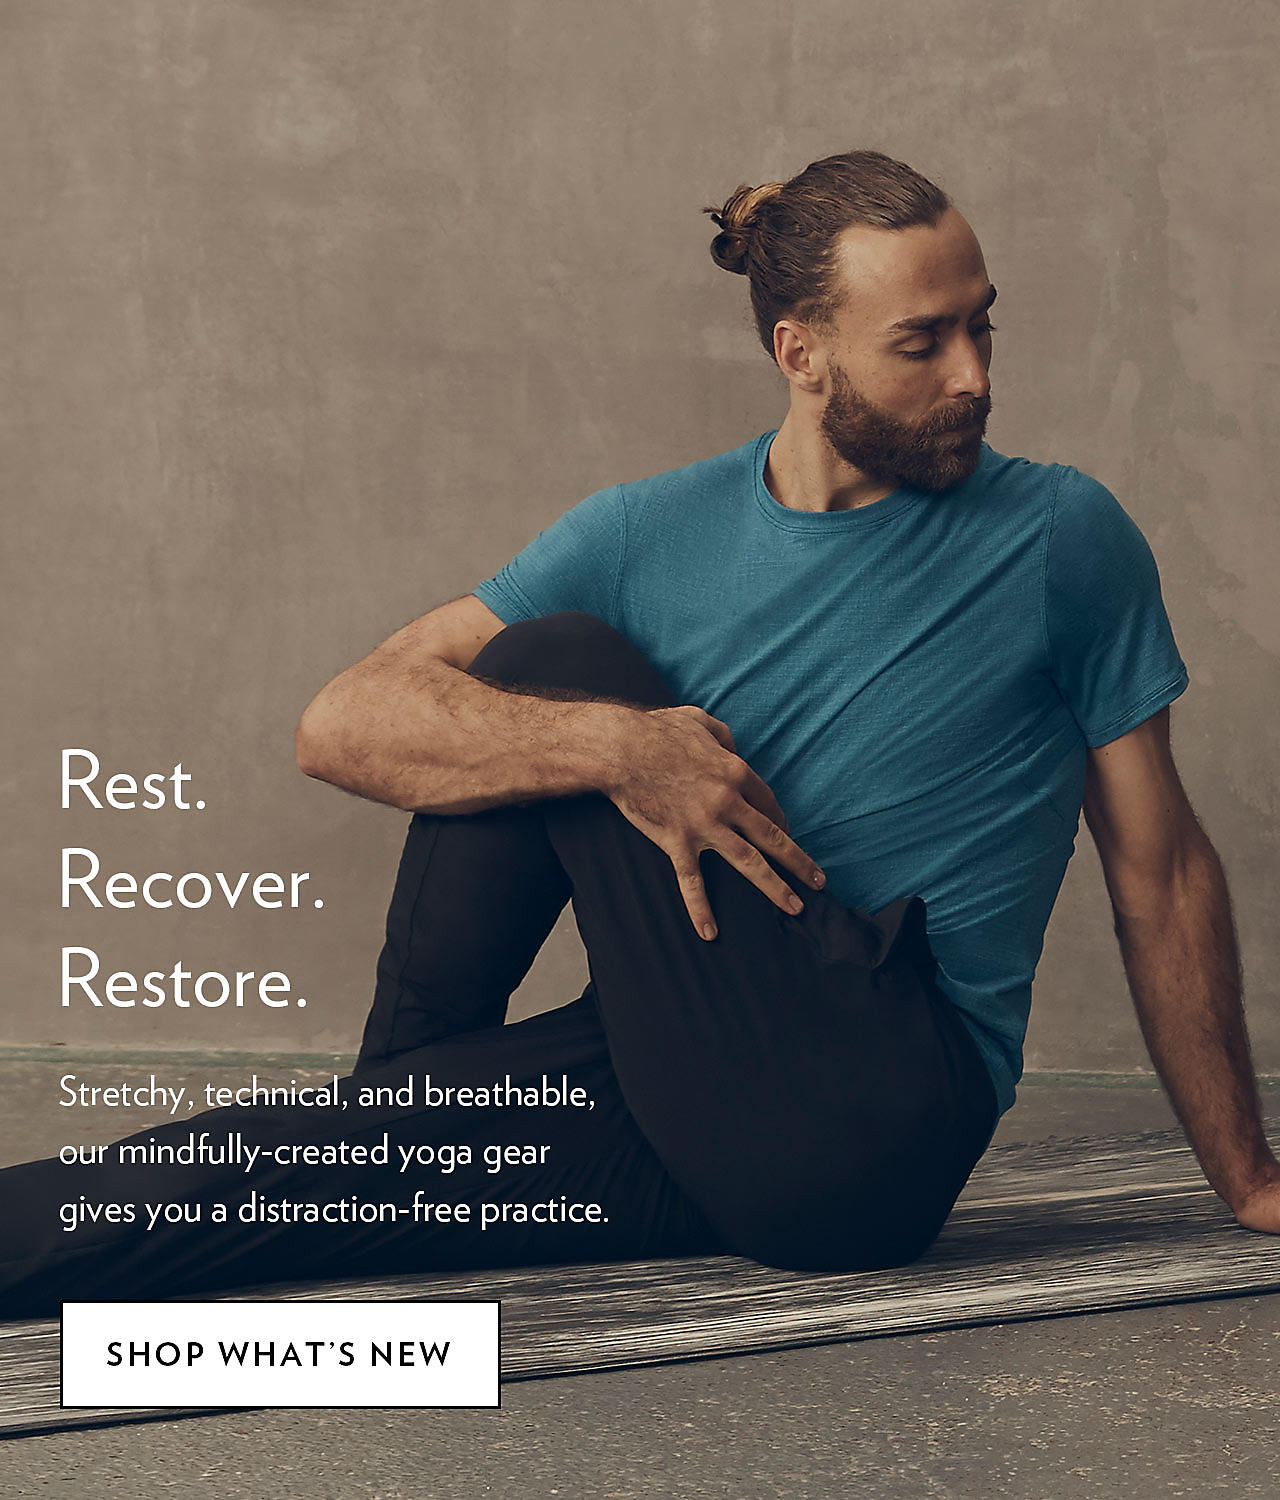 Rest. Recover. Restore. - SHOP WHAT'S NEW